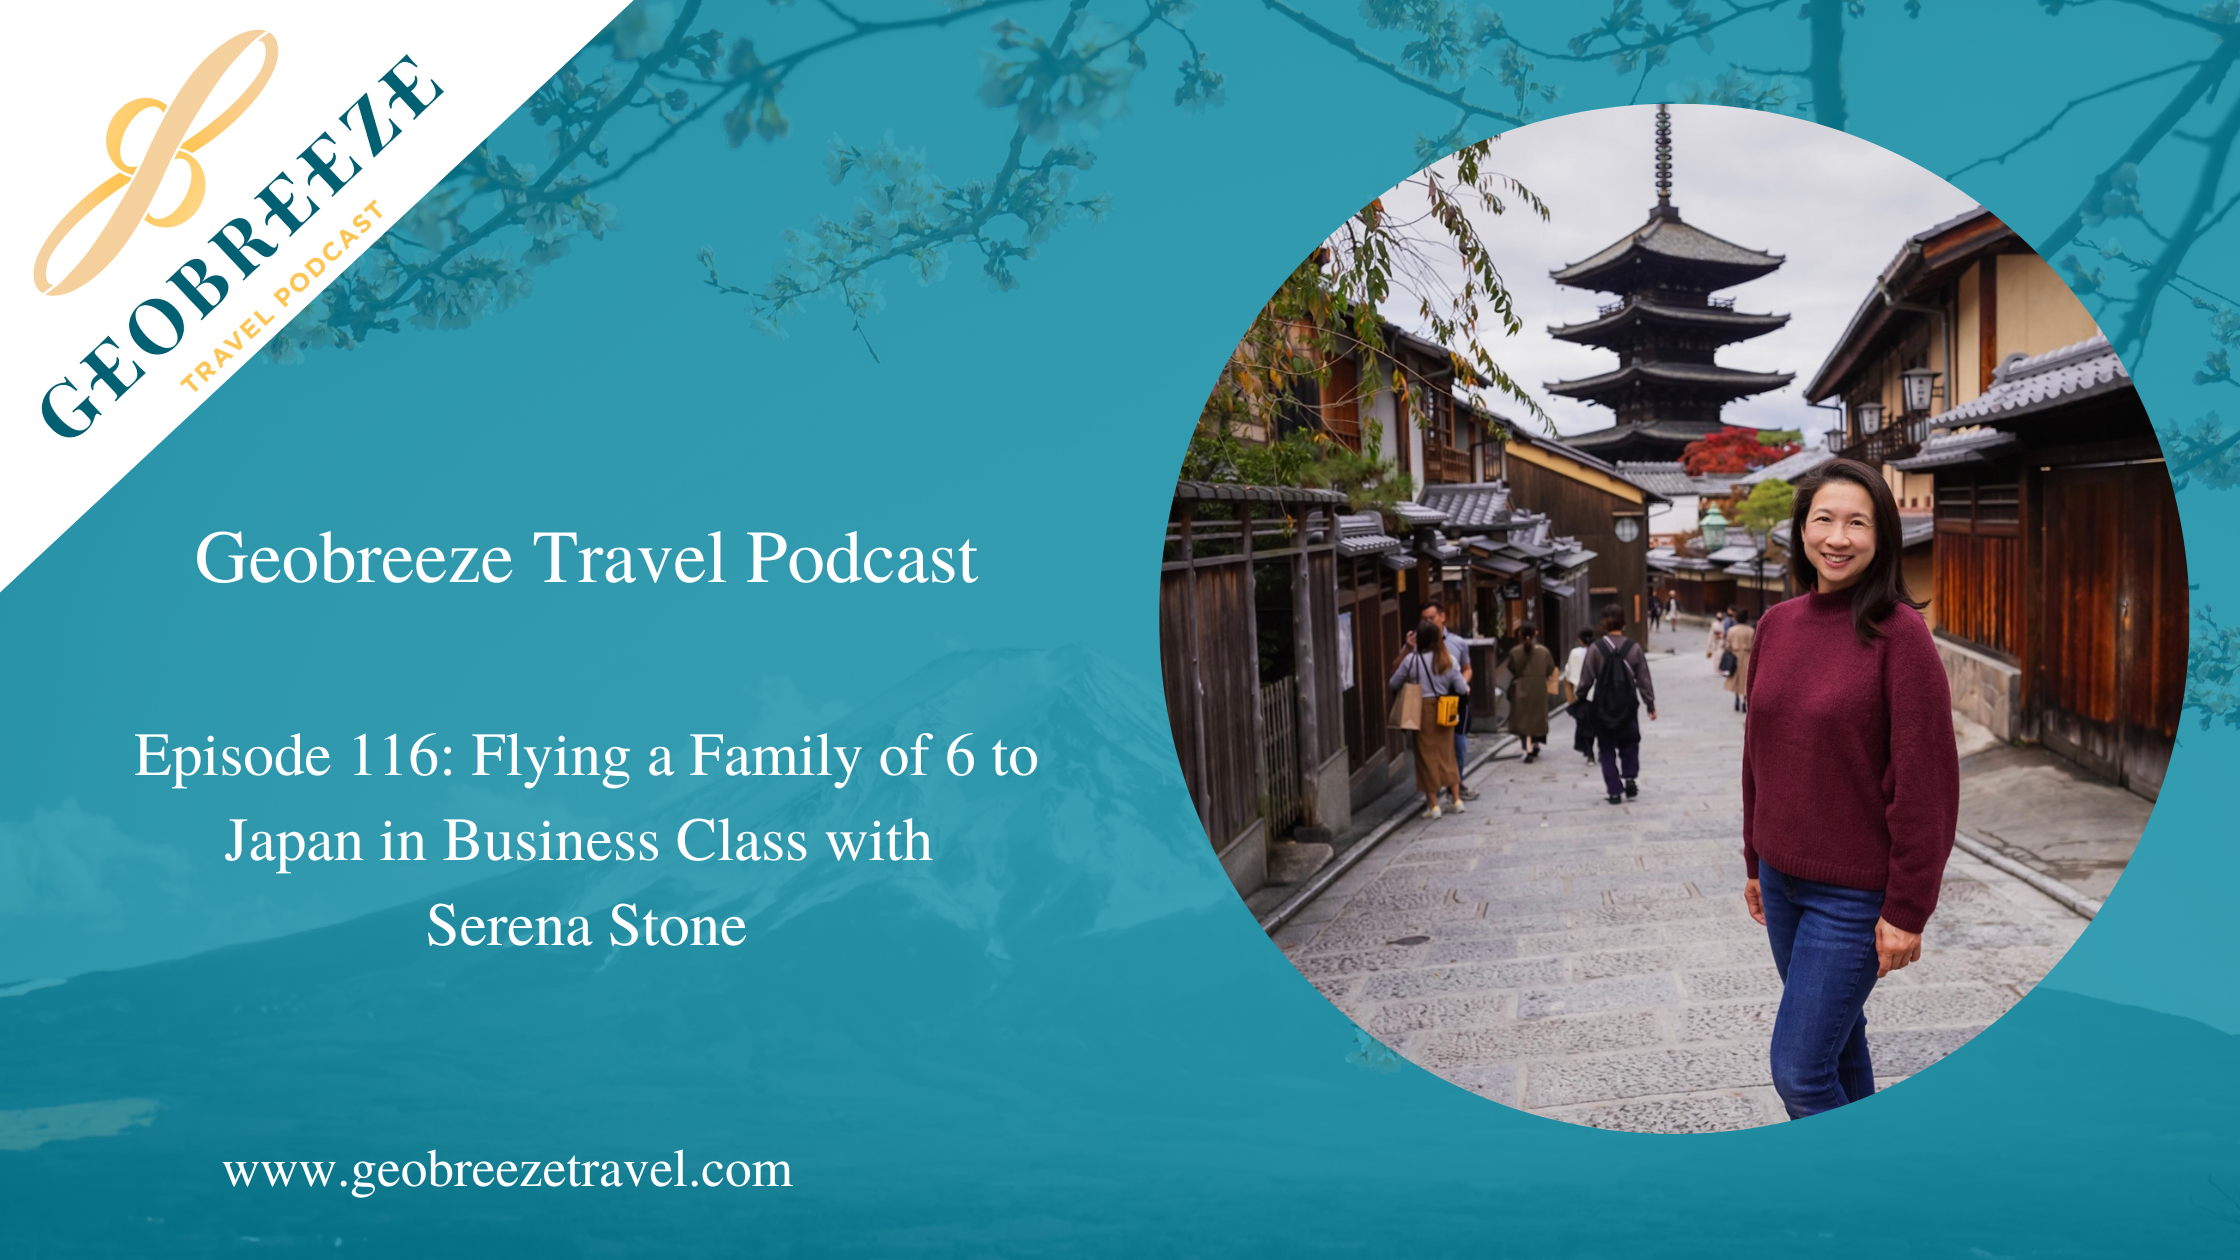 Episode 116: Flying a Family of 6 to Japan in Business Class with Serena Stone